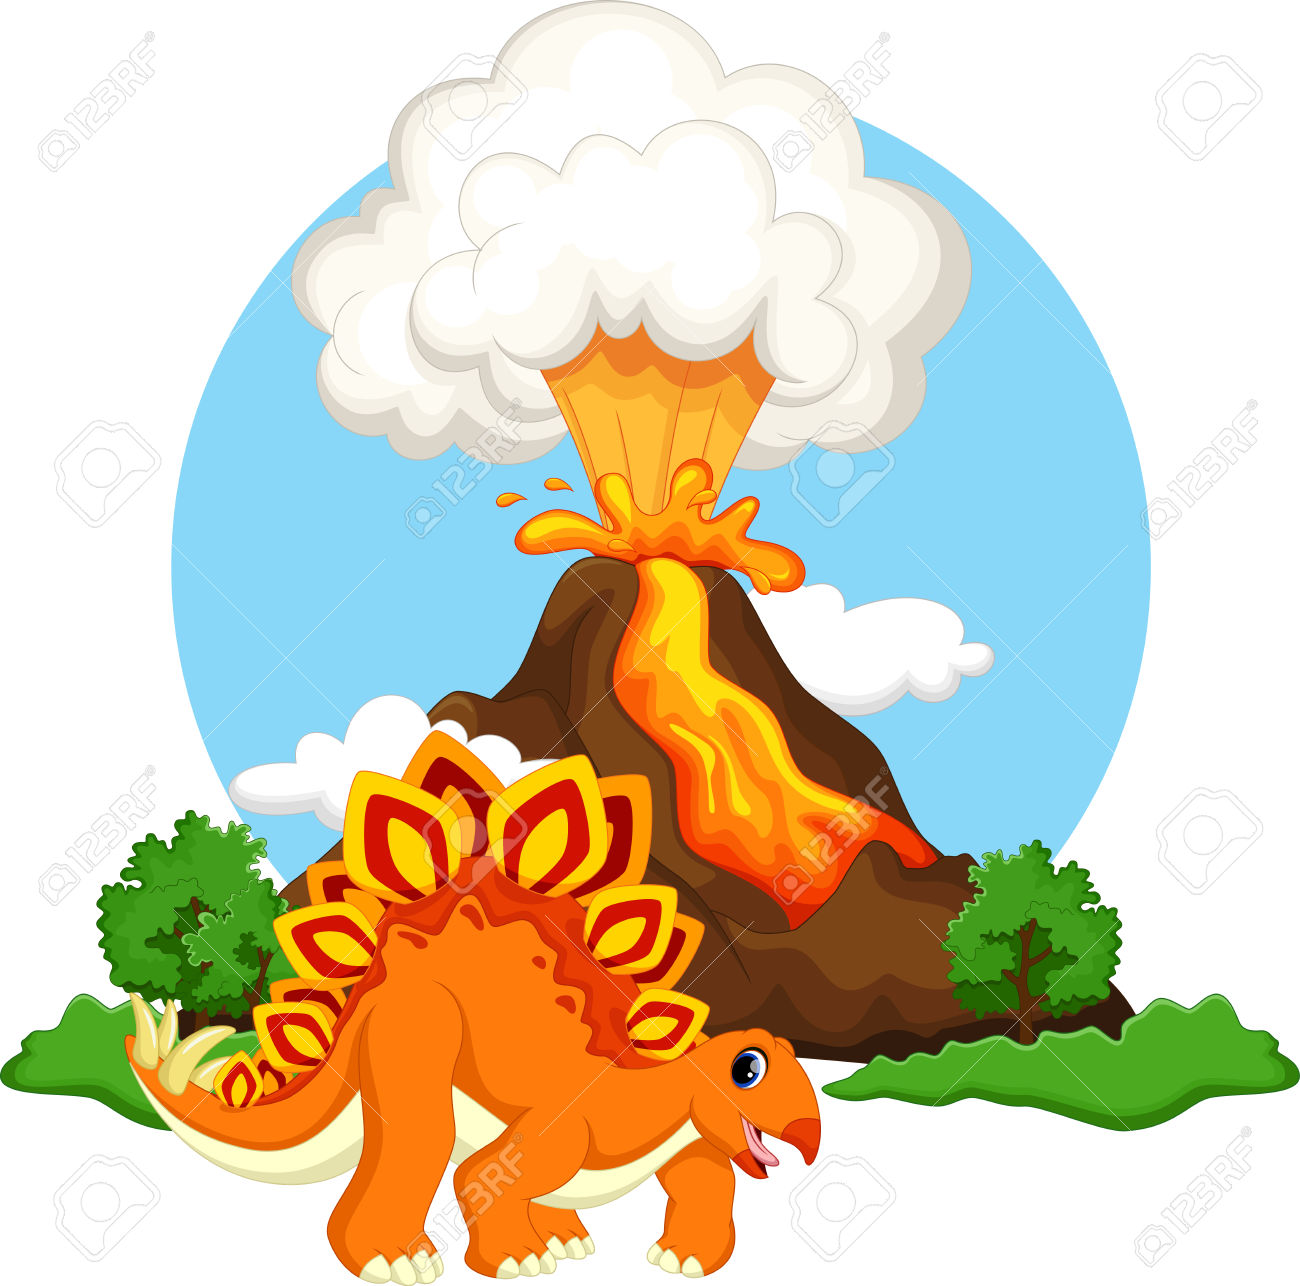 Dinosaur clipart volcano. Images free download best